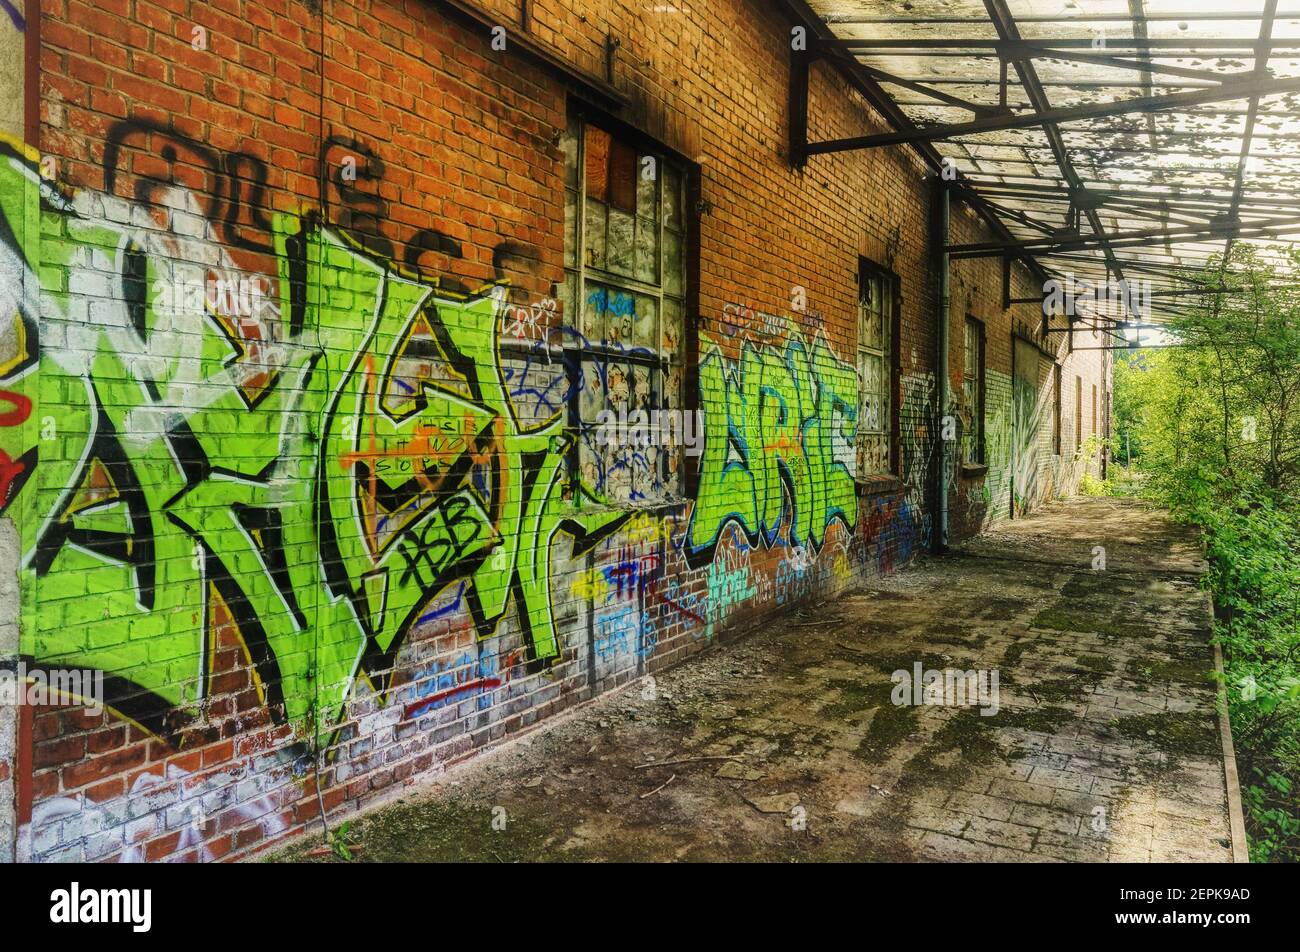 An abandoned and graffiti covered railway station in Berlin, Germany Stock Photo